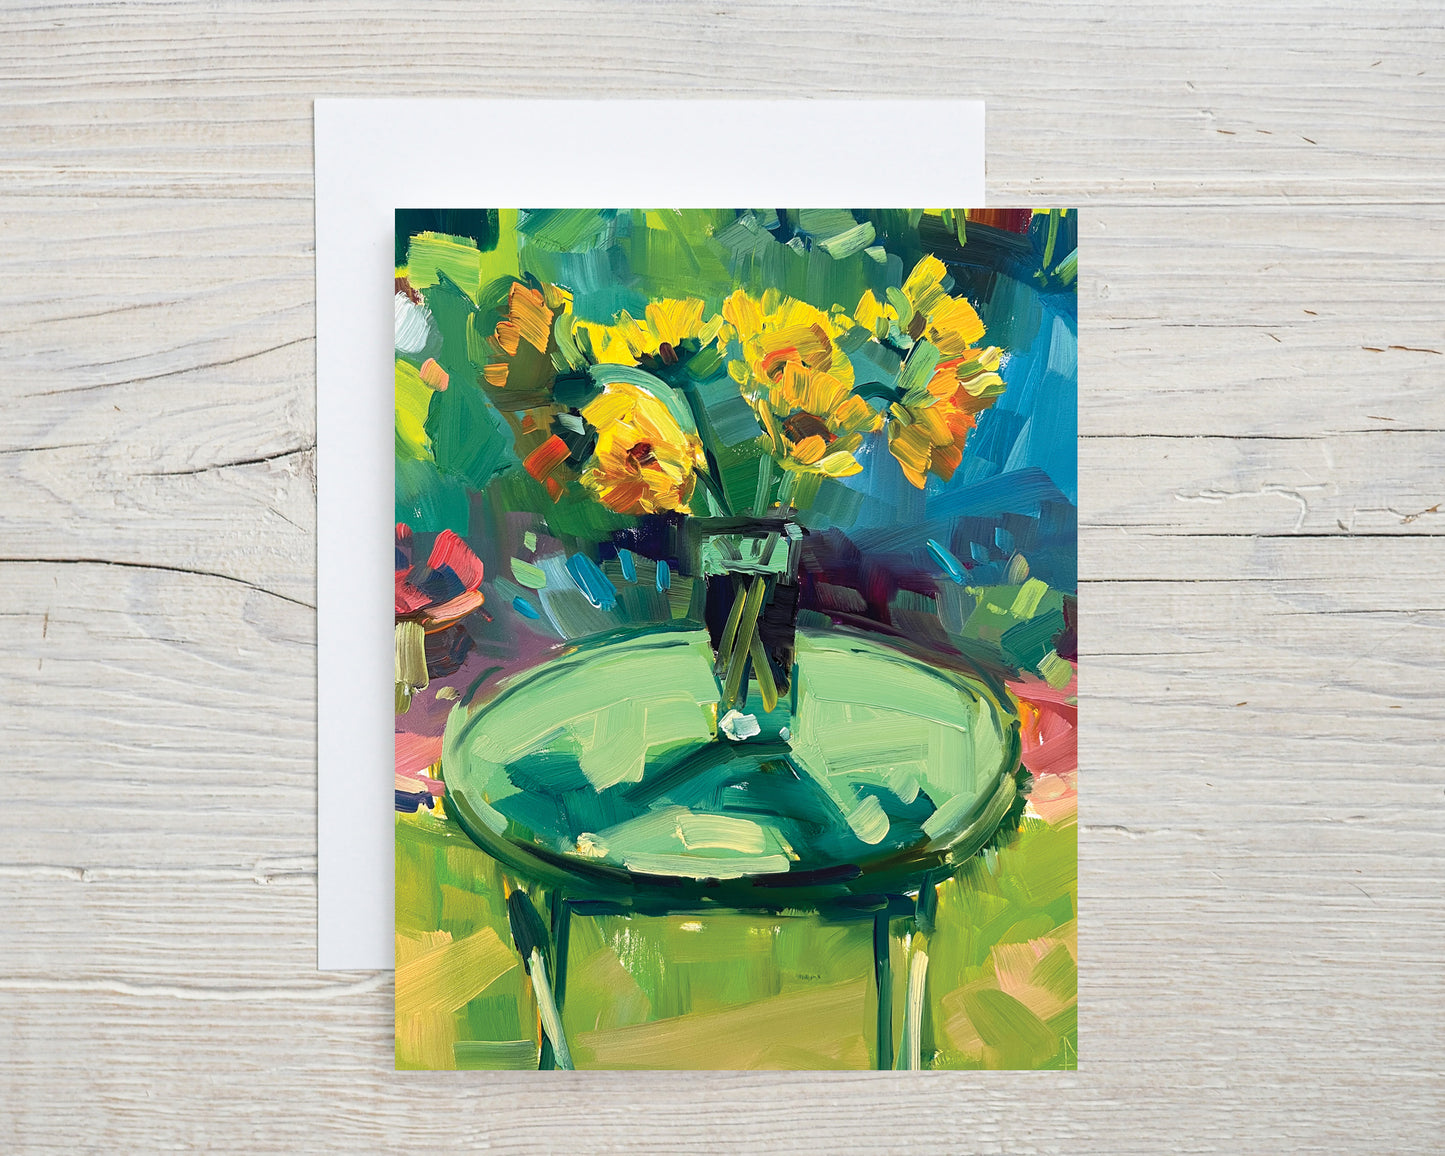 NEW Sunflowers on the Table Outside , Set of 8 notecards and envelopes